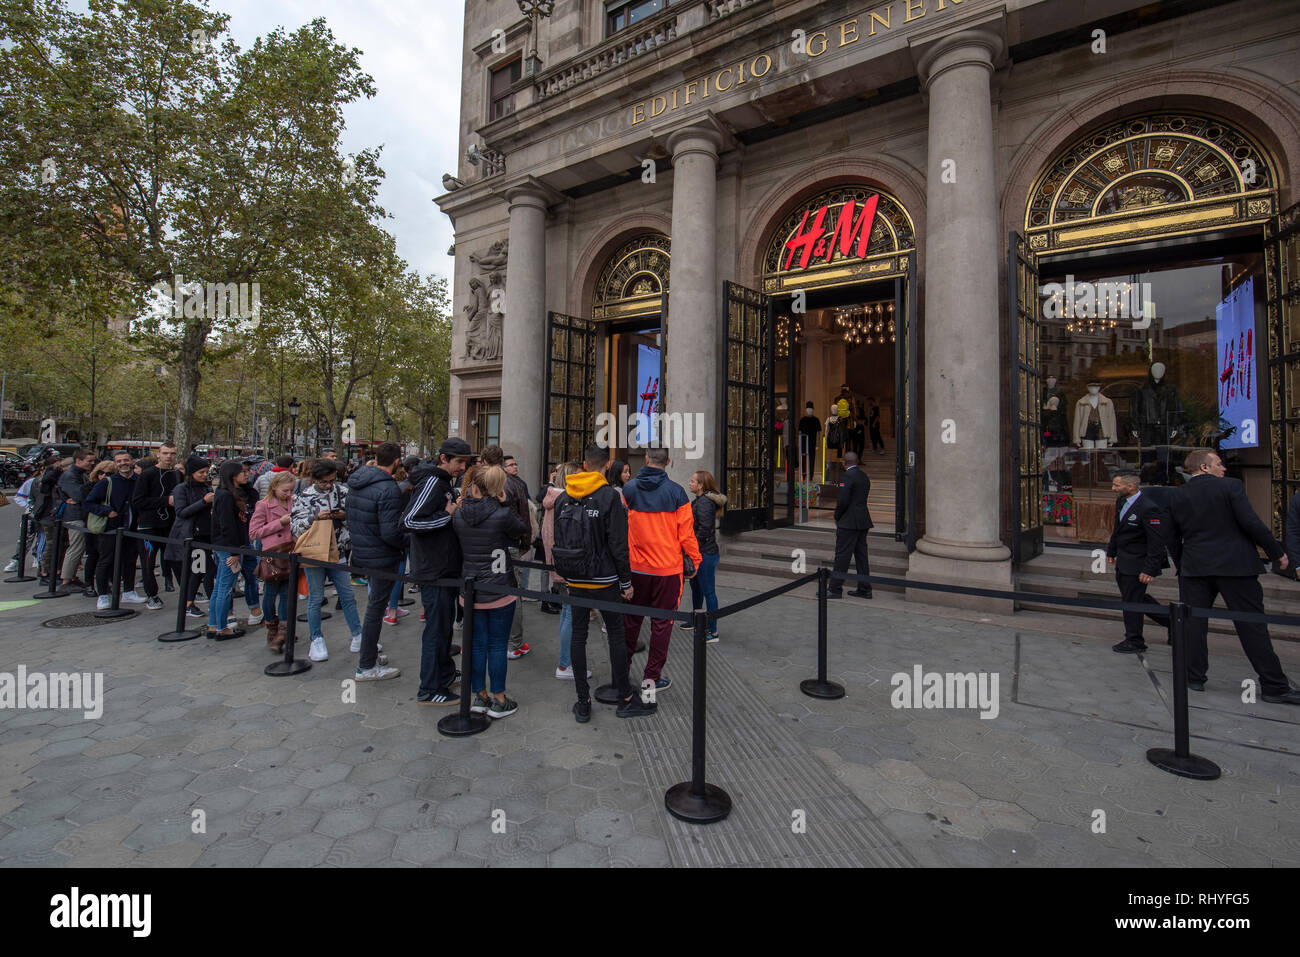 Barcelona, Spain - People buyers are lining up in a row waiting for H&M  clothing store to open up with its new collection of clothes Stock Photo -  Alamy